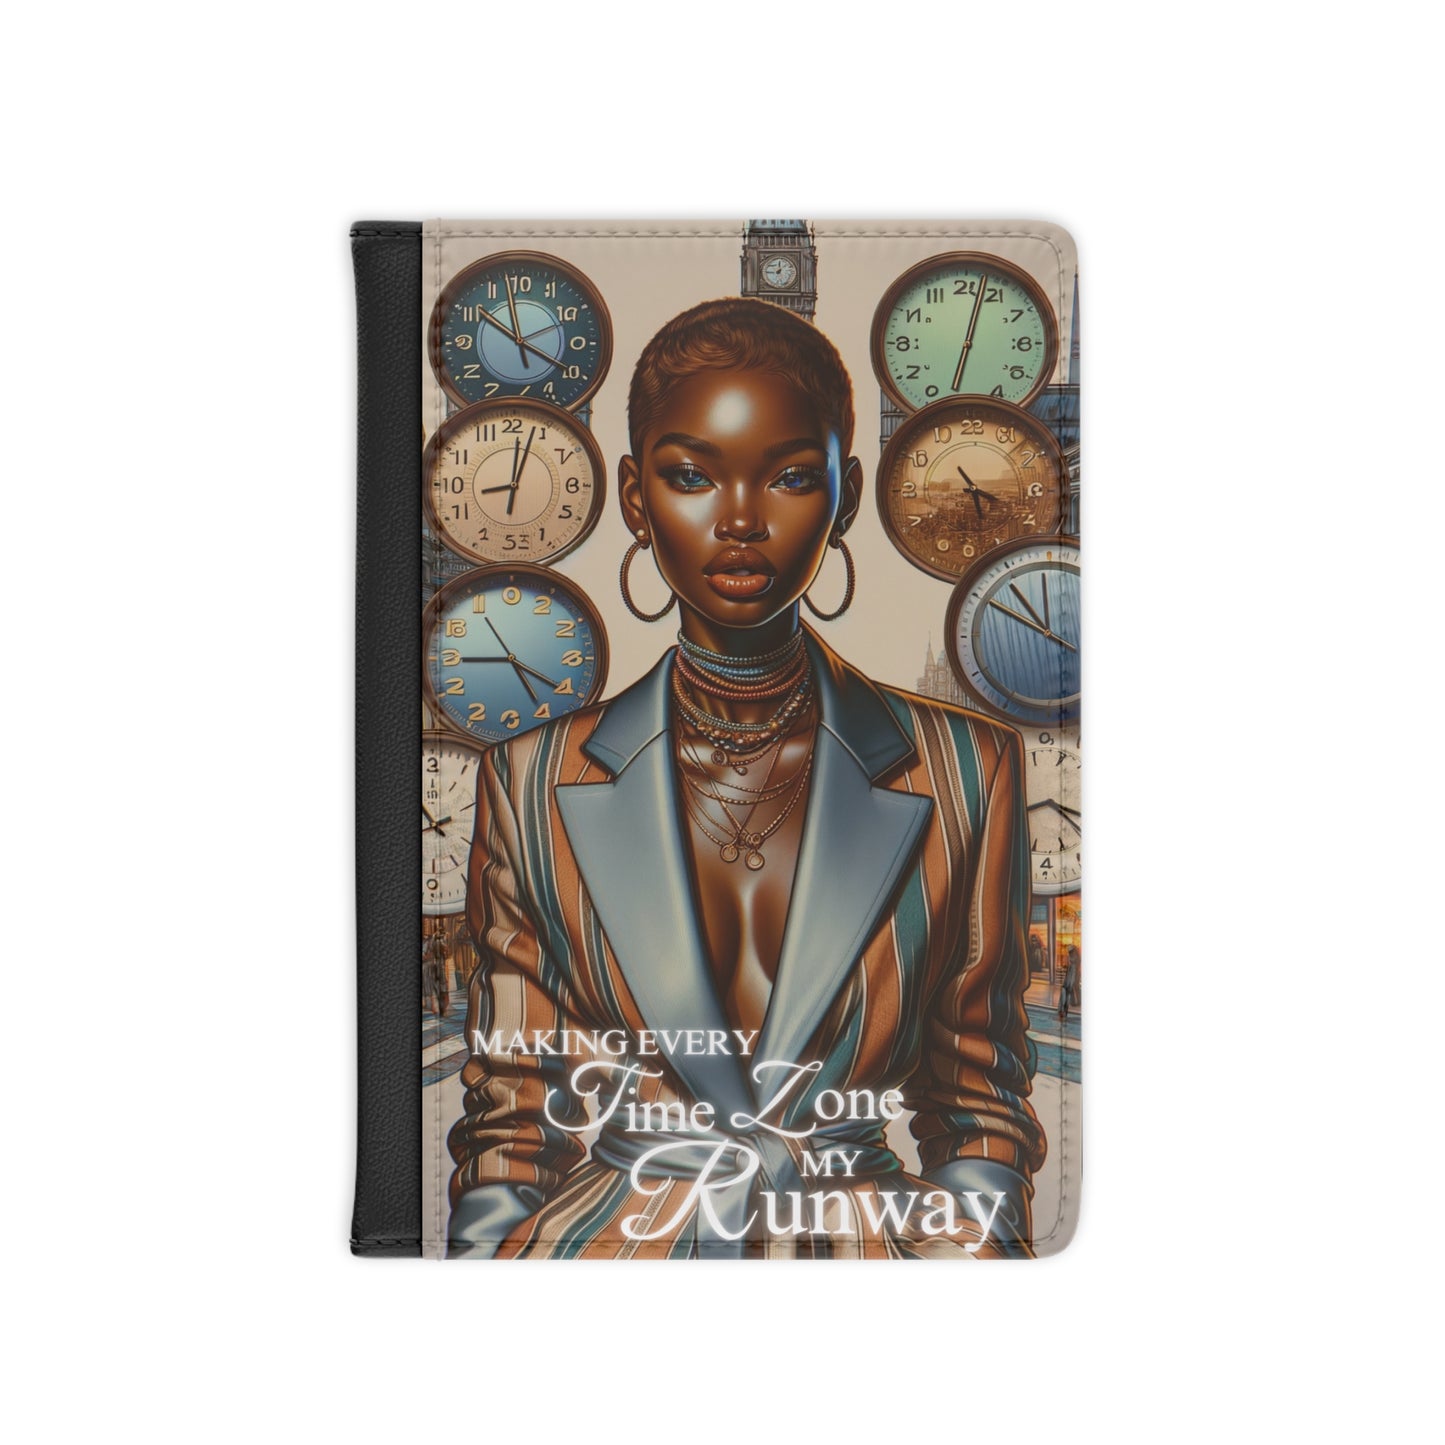 Making Every Time Zone My Runway - Chic Faux Leather Passport Cover, Stylish Travel Accessory